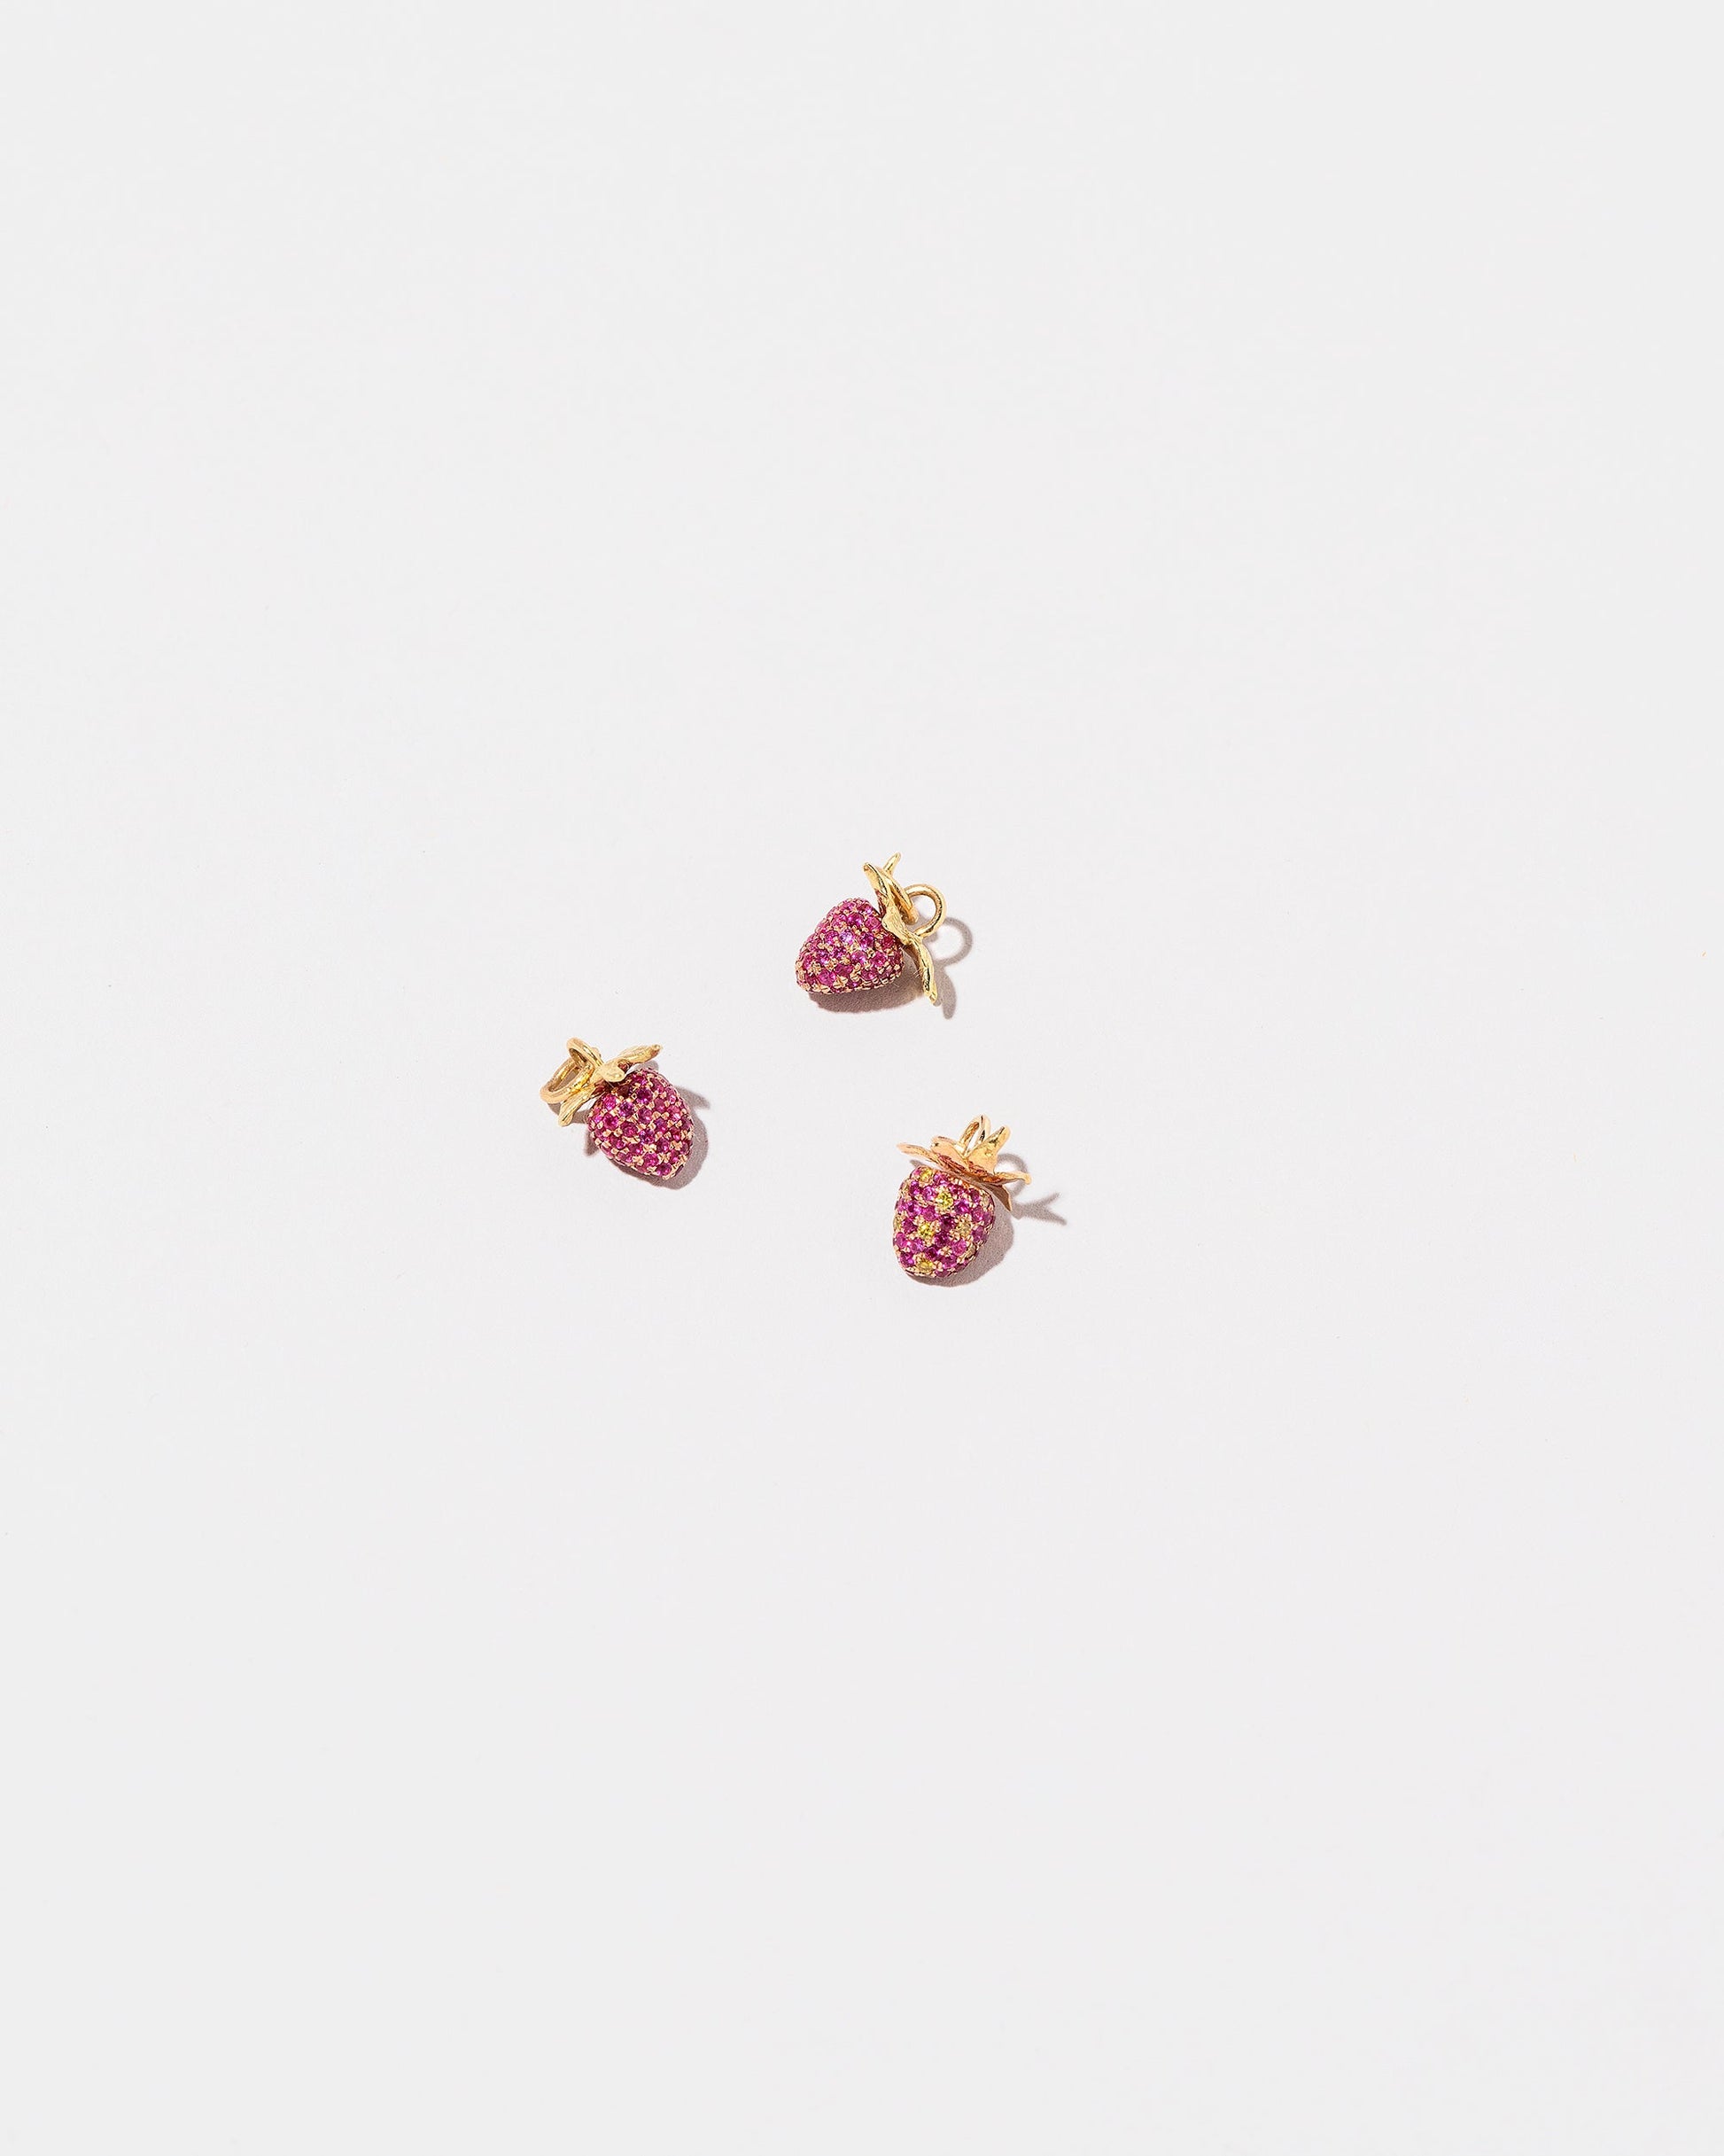  Strawberry Charms - Wild on light color background.